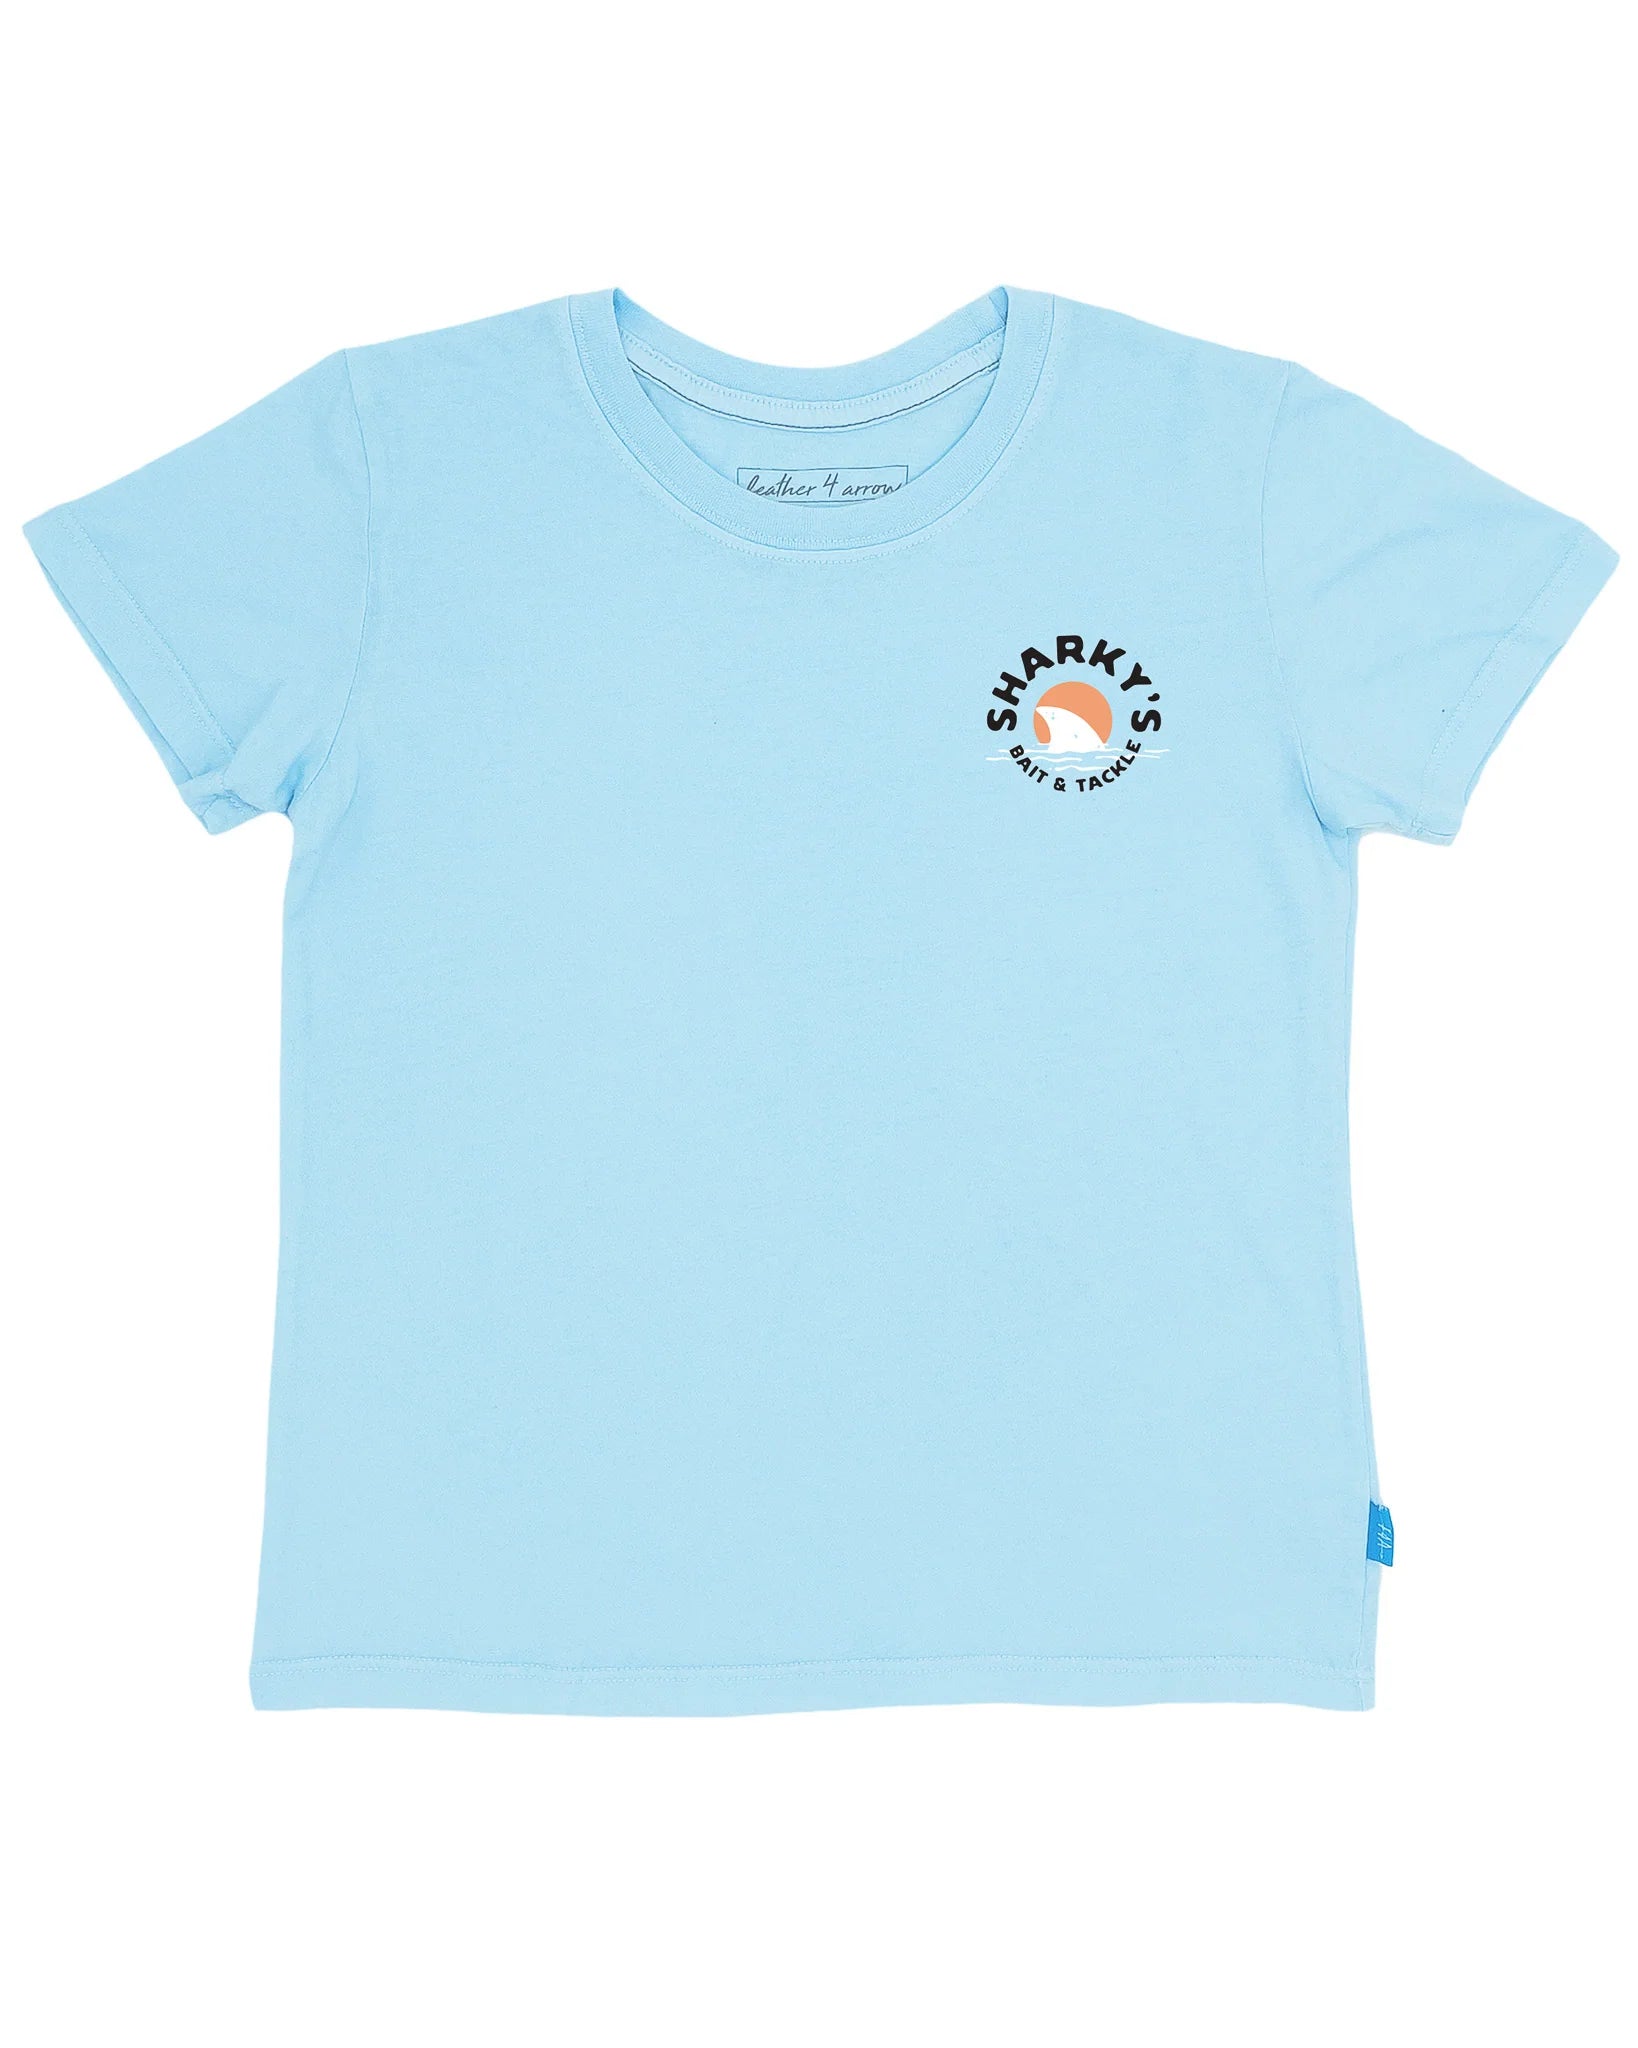 Feather 4 Arrow Kid's Graphic Tees